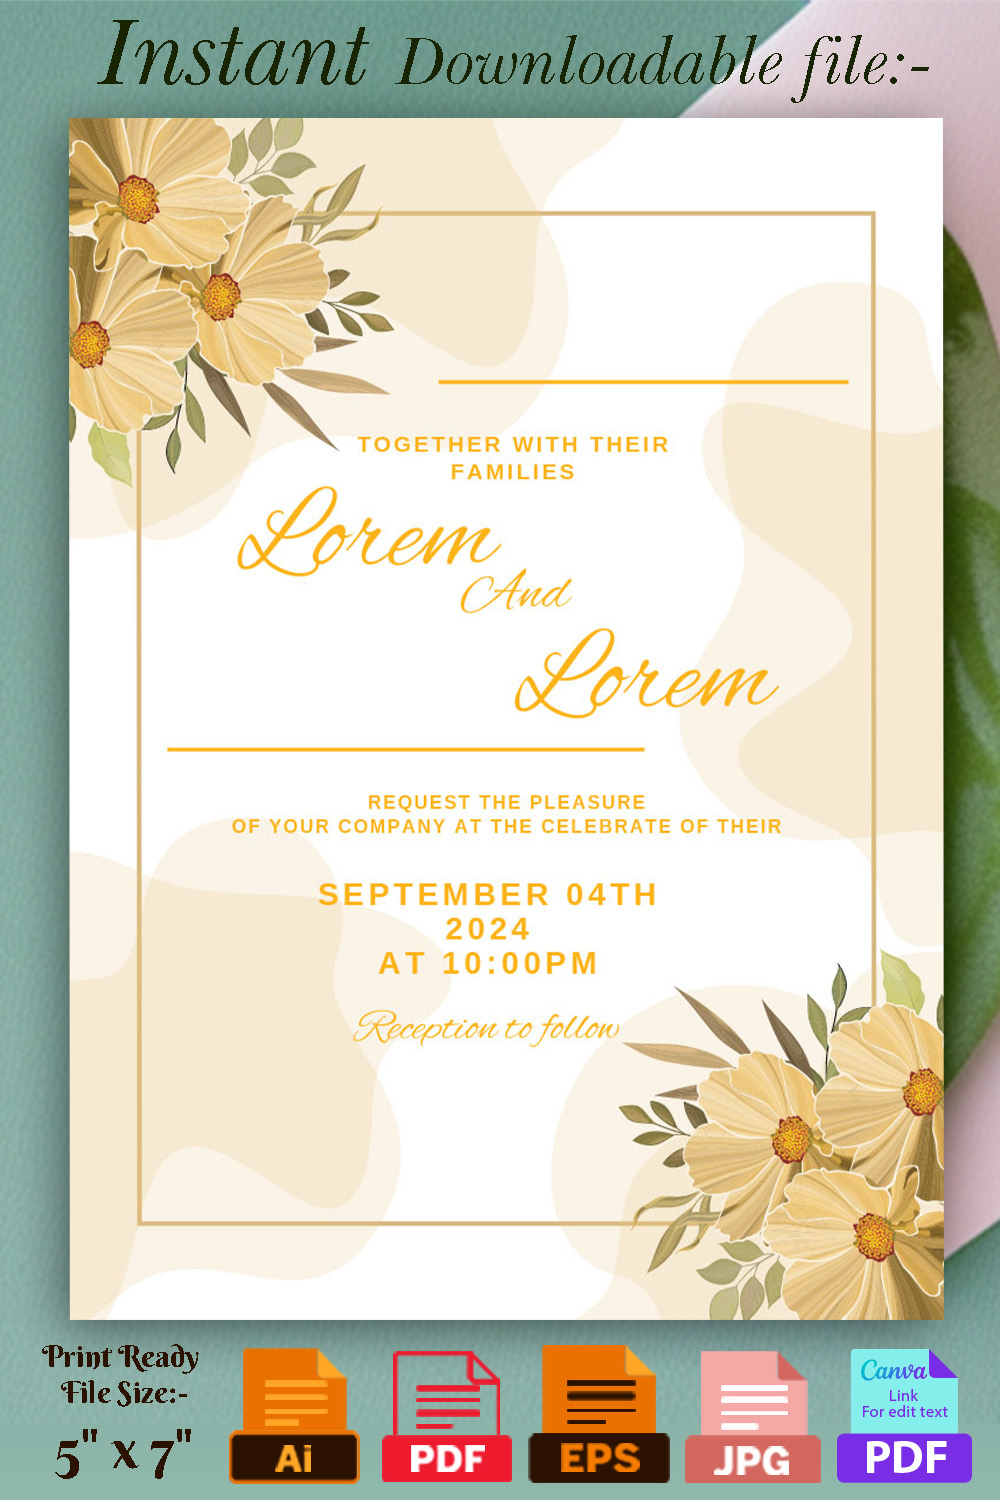 Image with amazing wedding invitation in yellow colors and flowers.